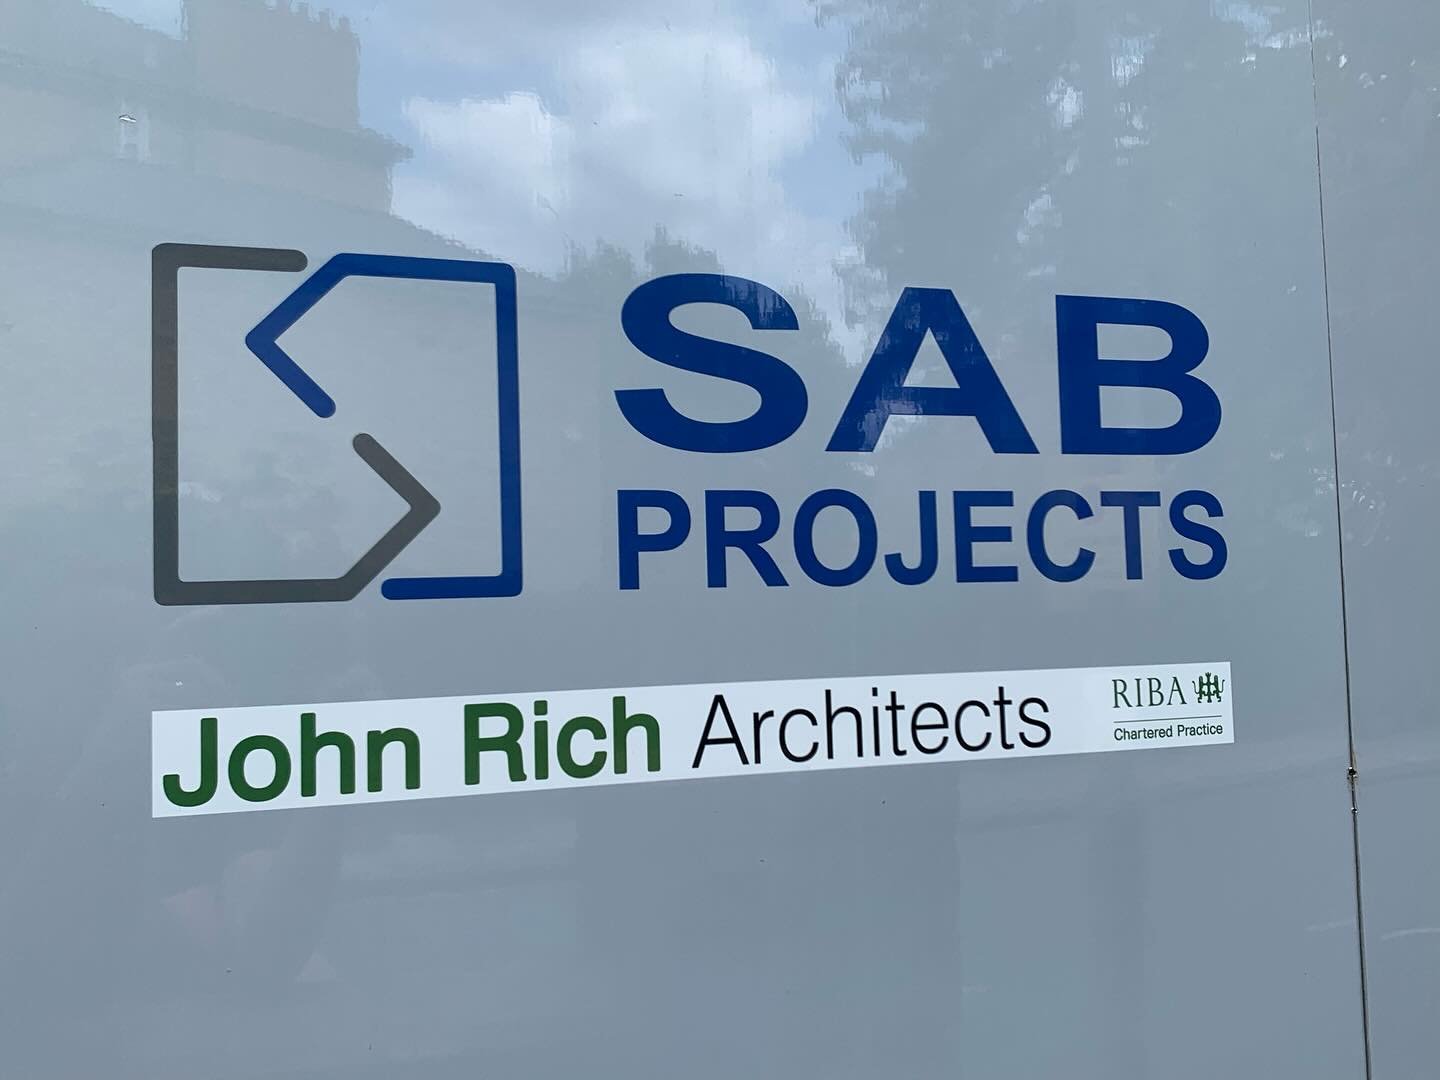 On the final straight now for a full basement installation in Putney for SAB Projects. Sauna, Steam Room and Jacuzzi to boot! As always a great job by the team.